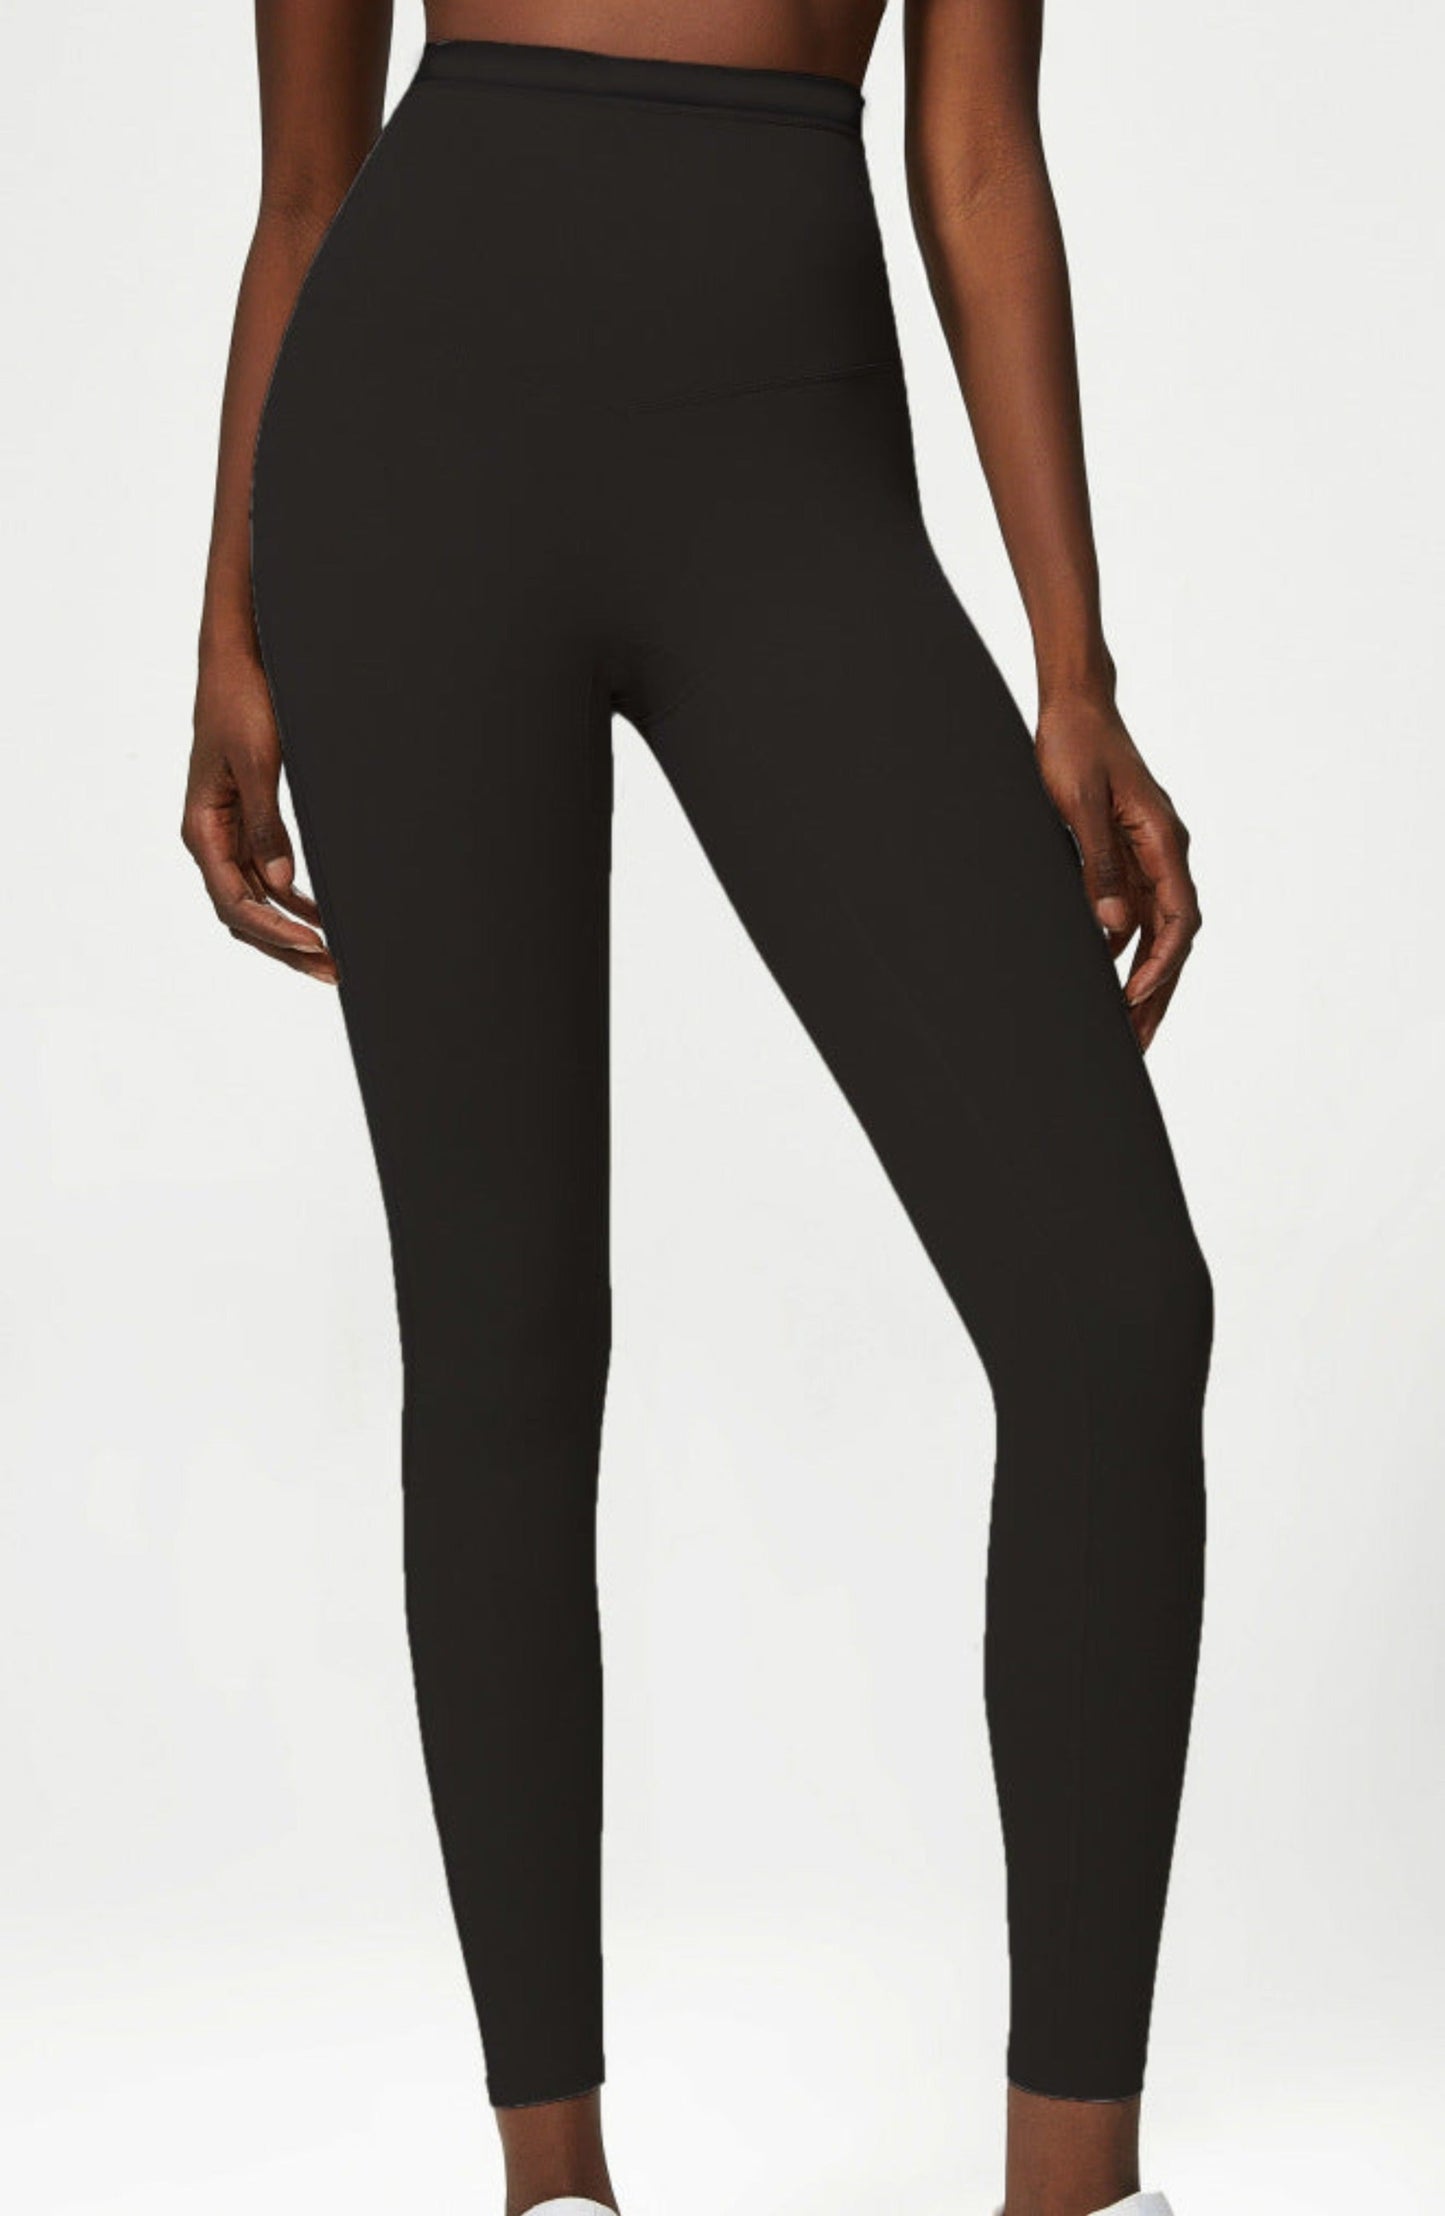 Fitness model wearing contouring, squat proof, black leggings from vibras activewear.